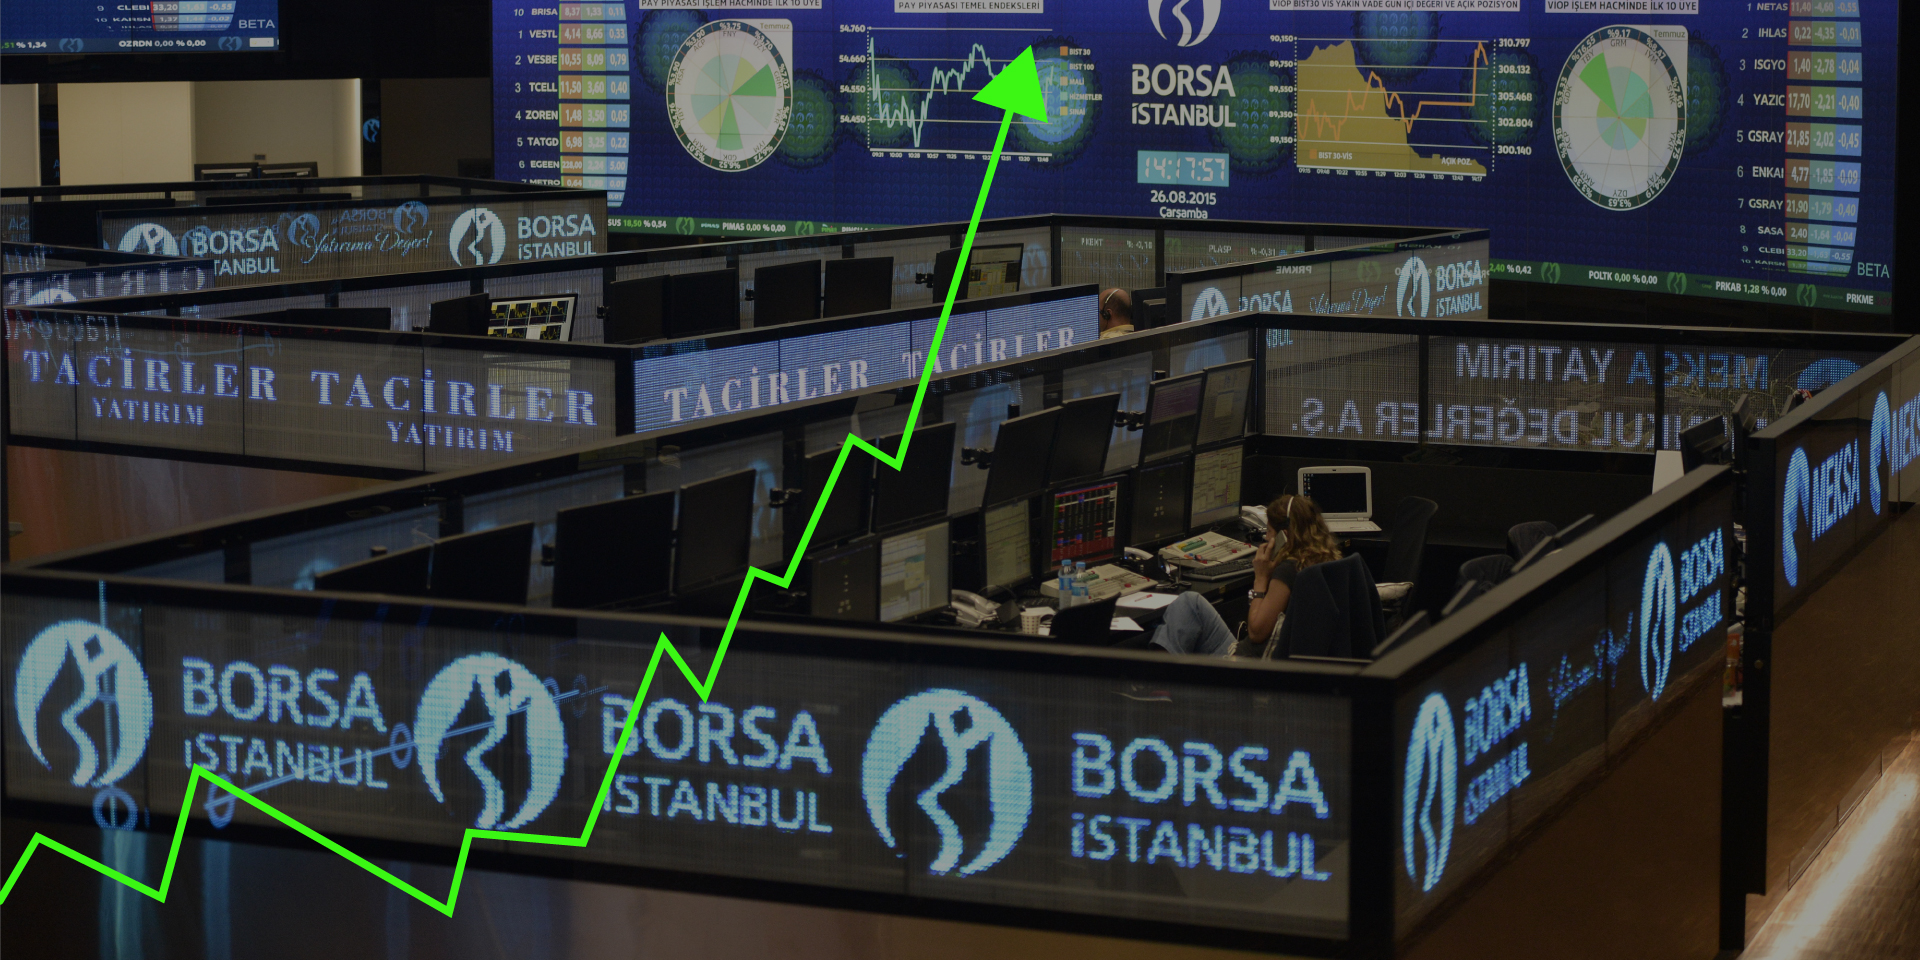 The Turkish Stock Market Has Grown by Over 1000% in Just Four Years